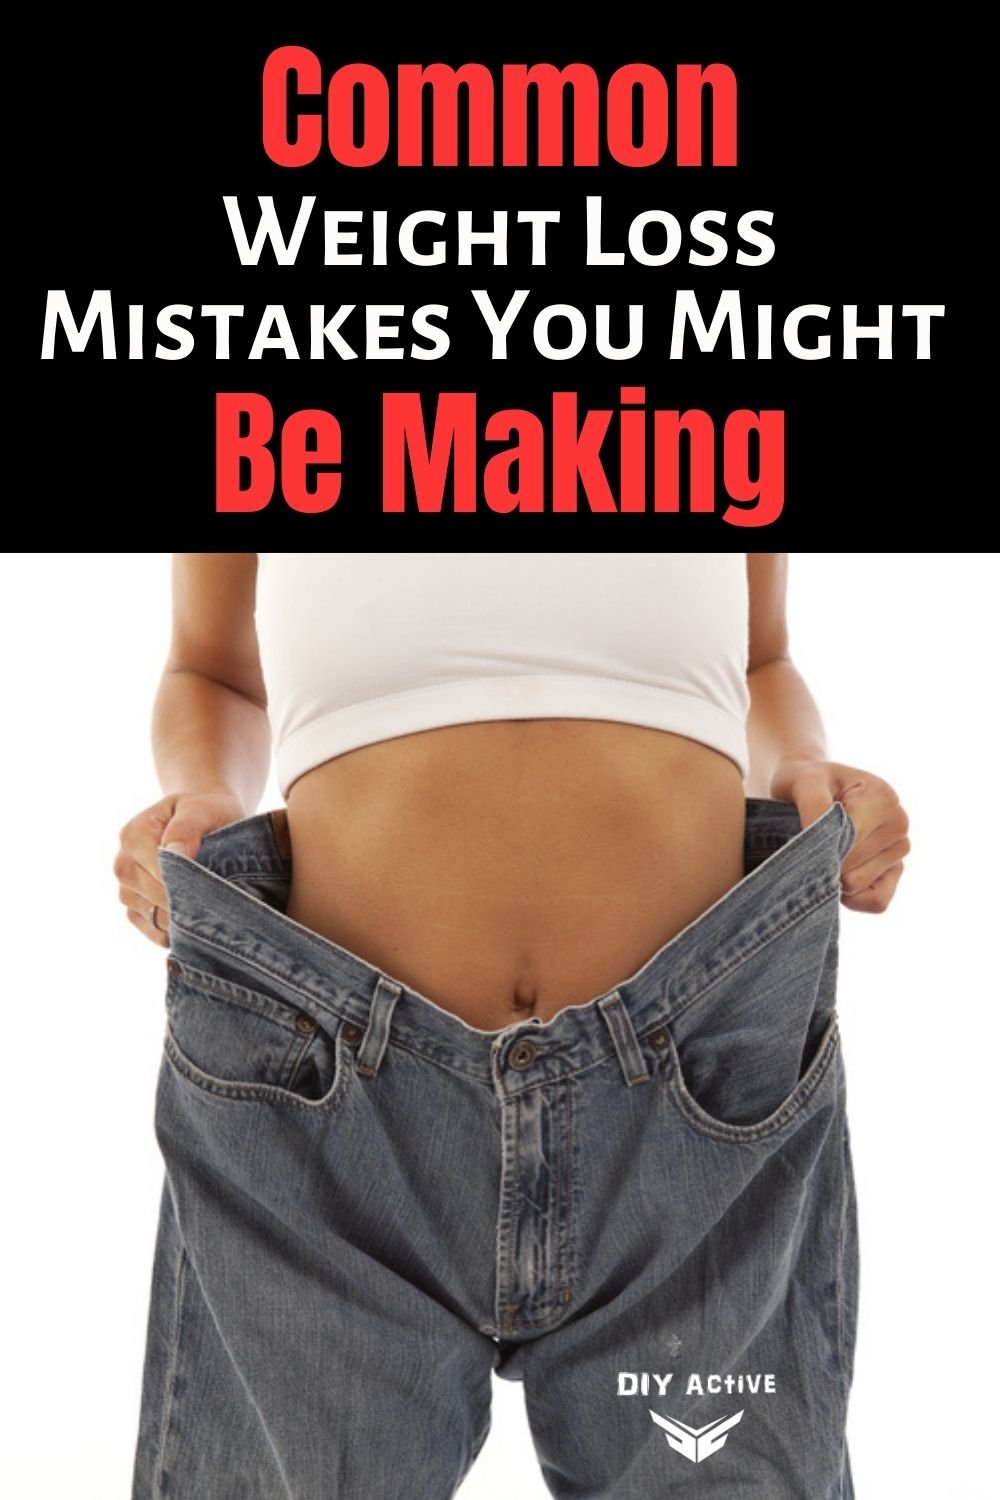 Common Weight Loss Mistakes You Might Be Making